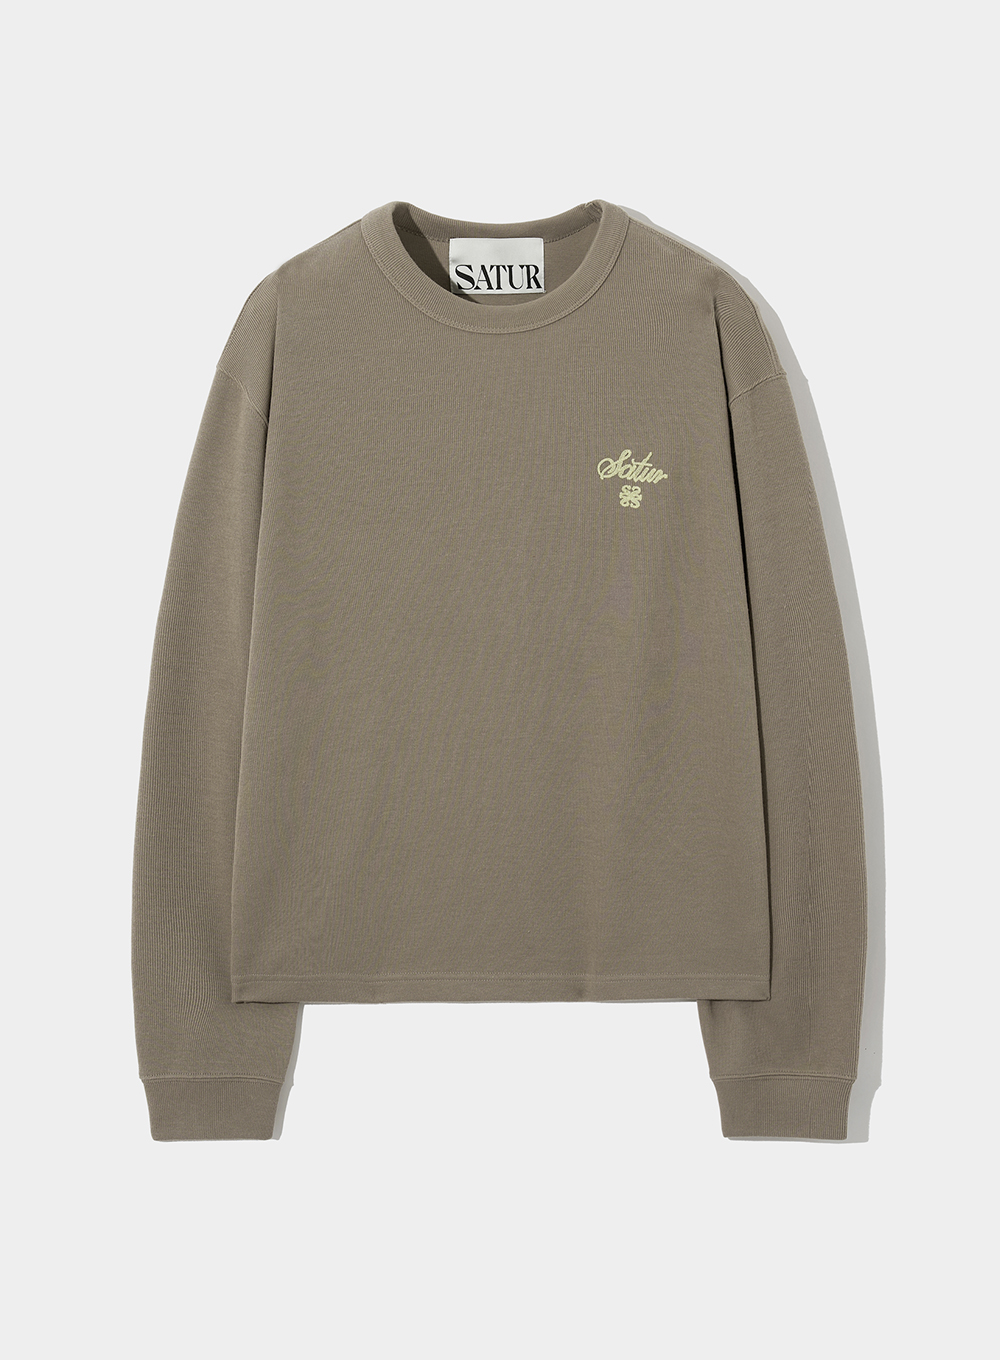 All Day Crew Neck Long Sleeve - Soft Beige